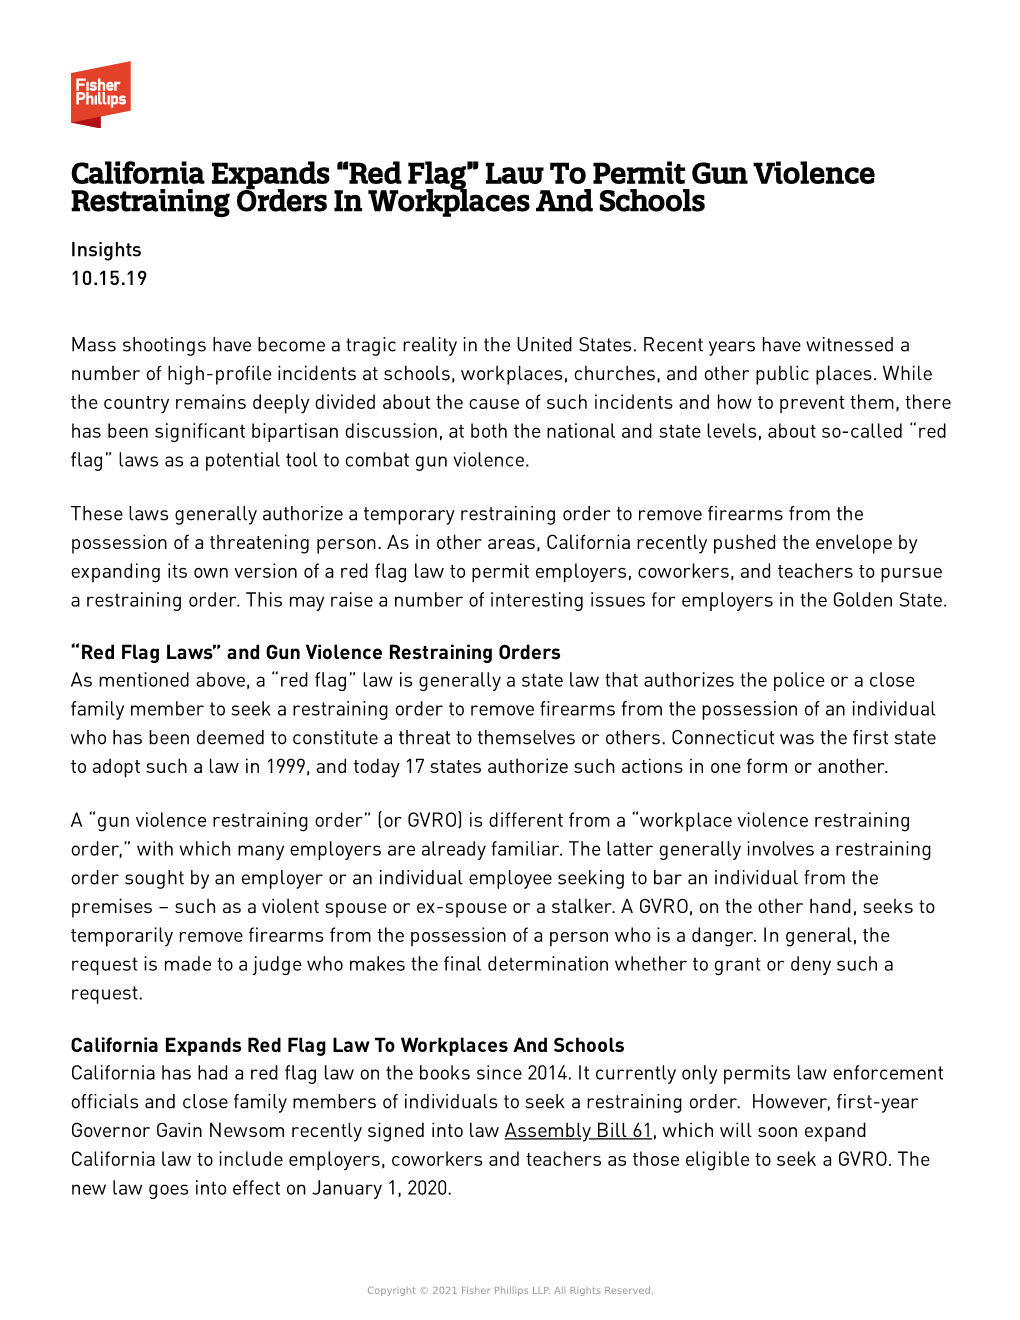 California Expands “Red Flag” Law to Permit Gun Violence Restraining Orders in Workplaces and Schools Insights 10.15.19